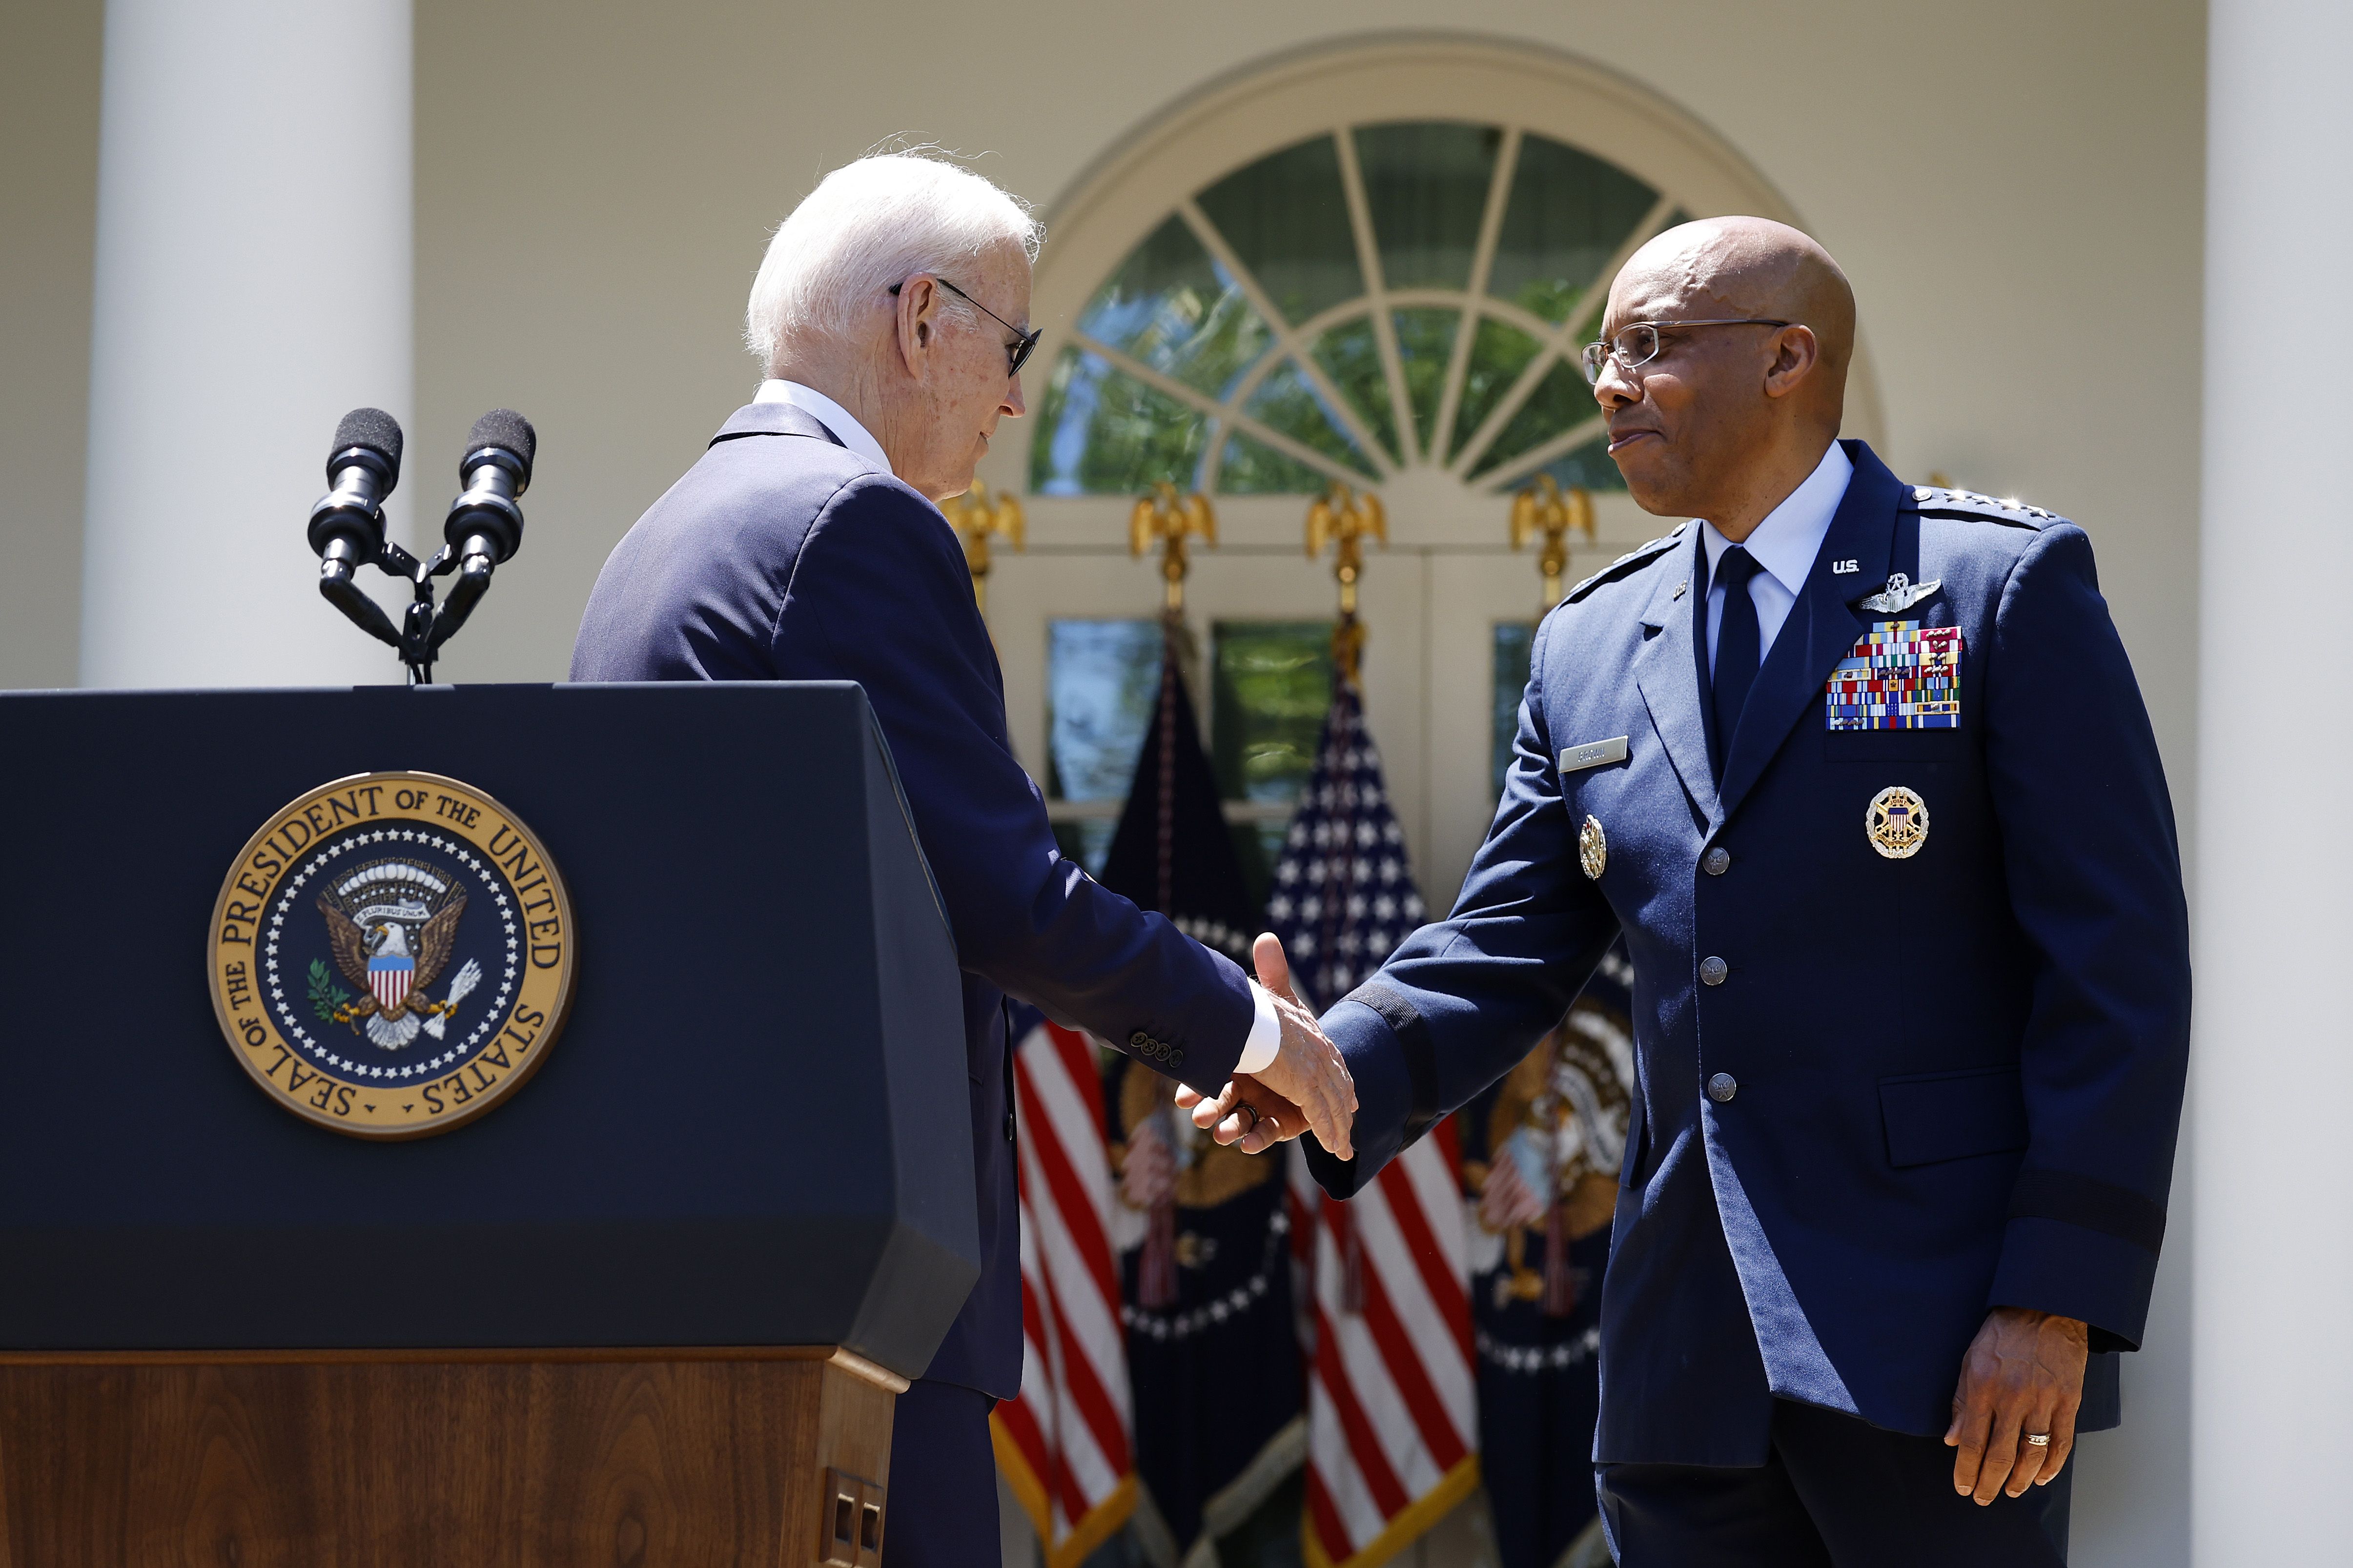 President Joe Biden shakes hands with Gen. Charles Q. Brown, Jr. as he announces his intent to nominate him to serve as the next Chairman of the Joint Chiefs of Staff during an event in the Rose Garden of the White House May 25, 2023 in Washington, DC.